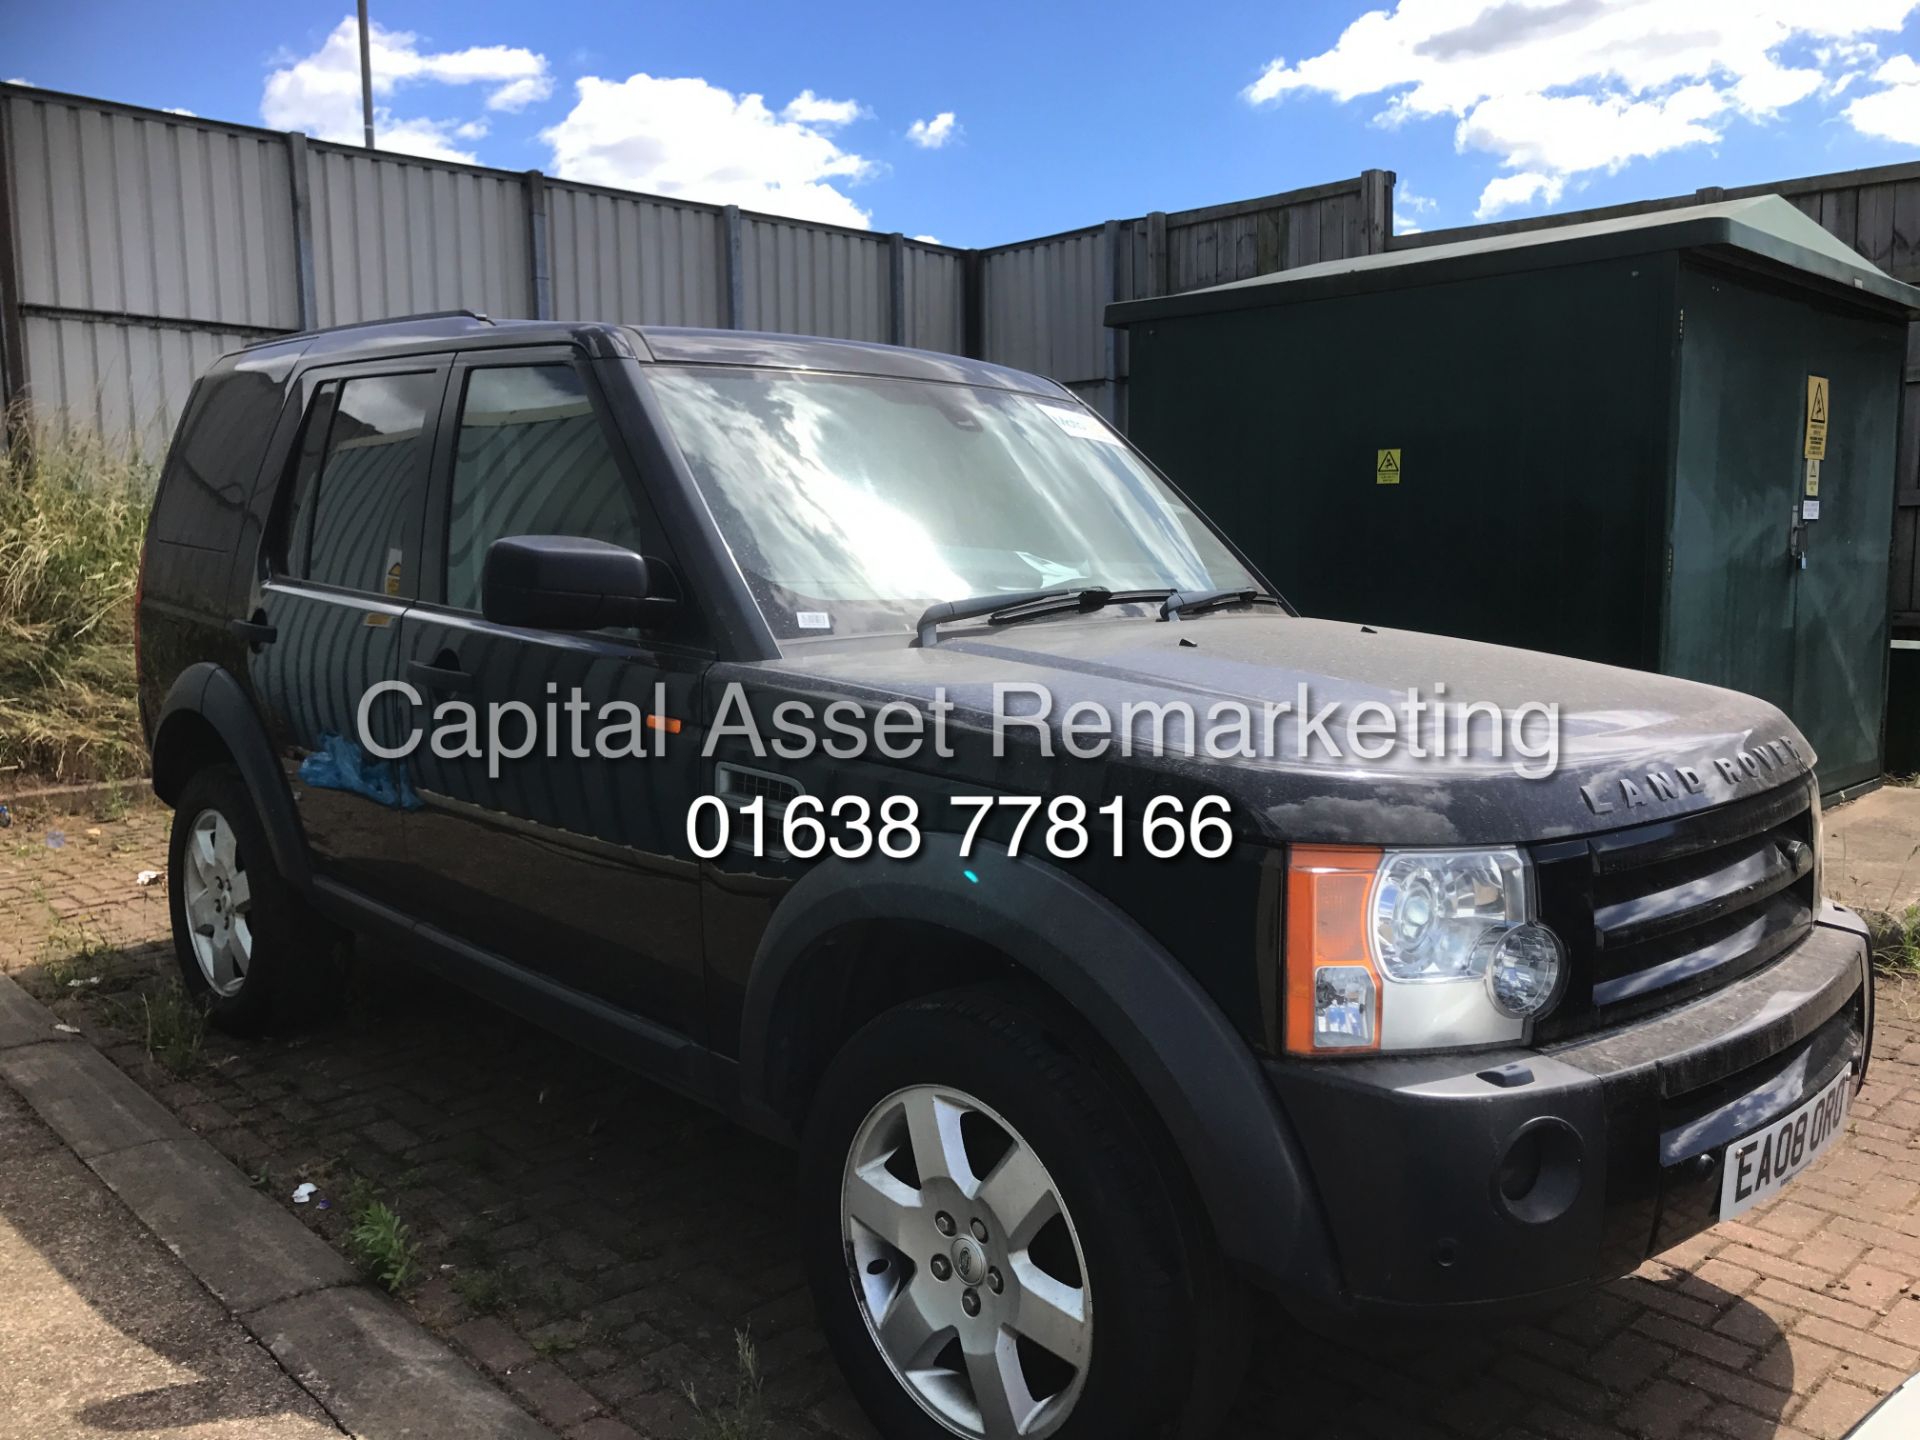 (ON SALE) LANDROVER DISCOVERY 3 "TDV6 "HSE" AUTOMATIC (08 REG) BLACK - FSH - LEATHER - SAT NAV - - Image 2 of 16